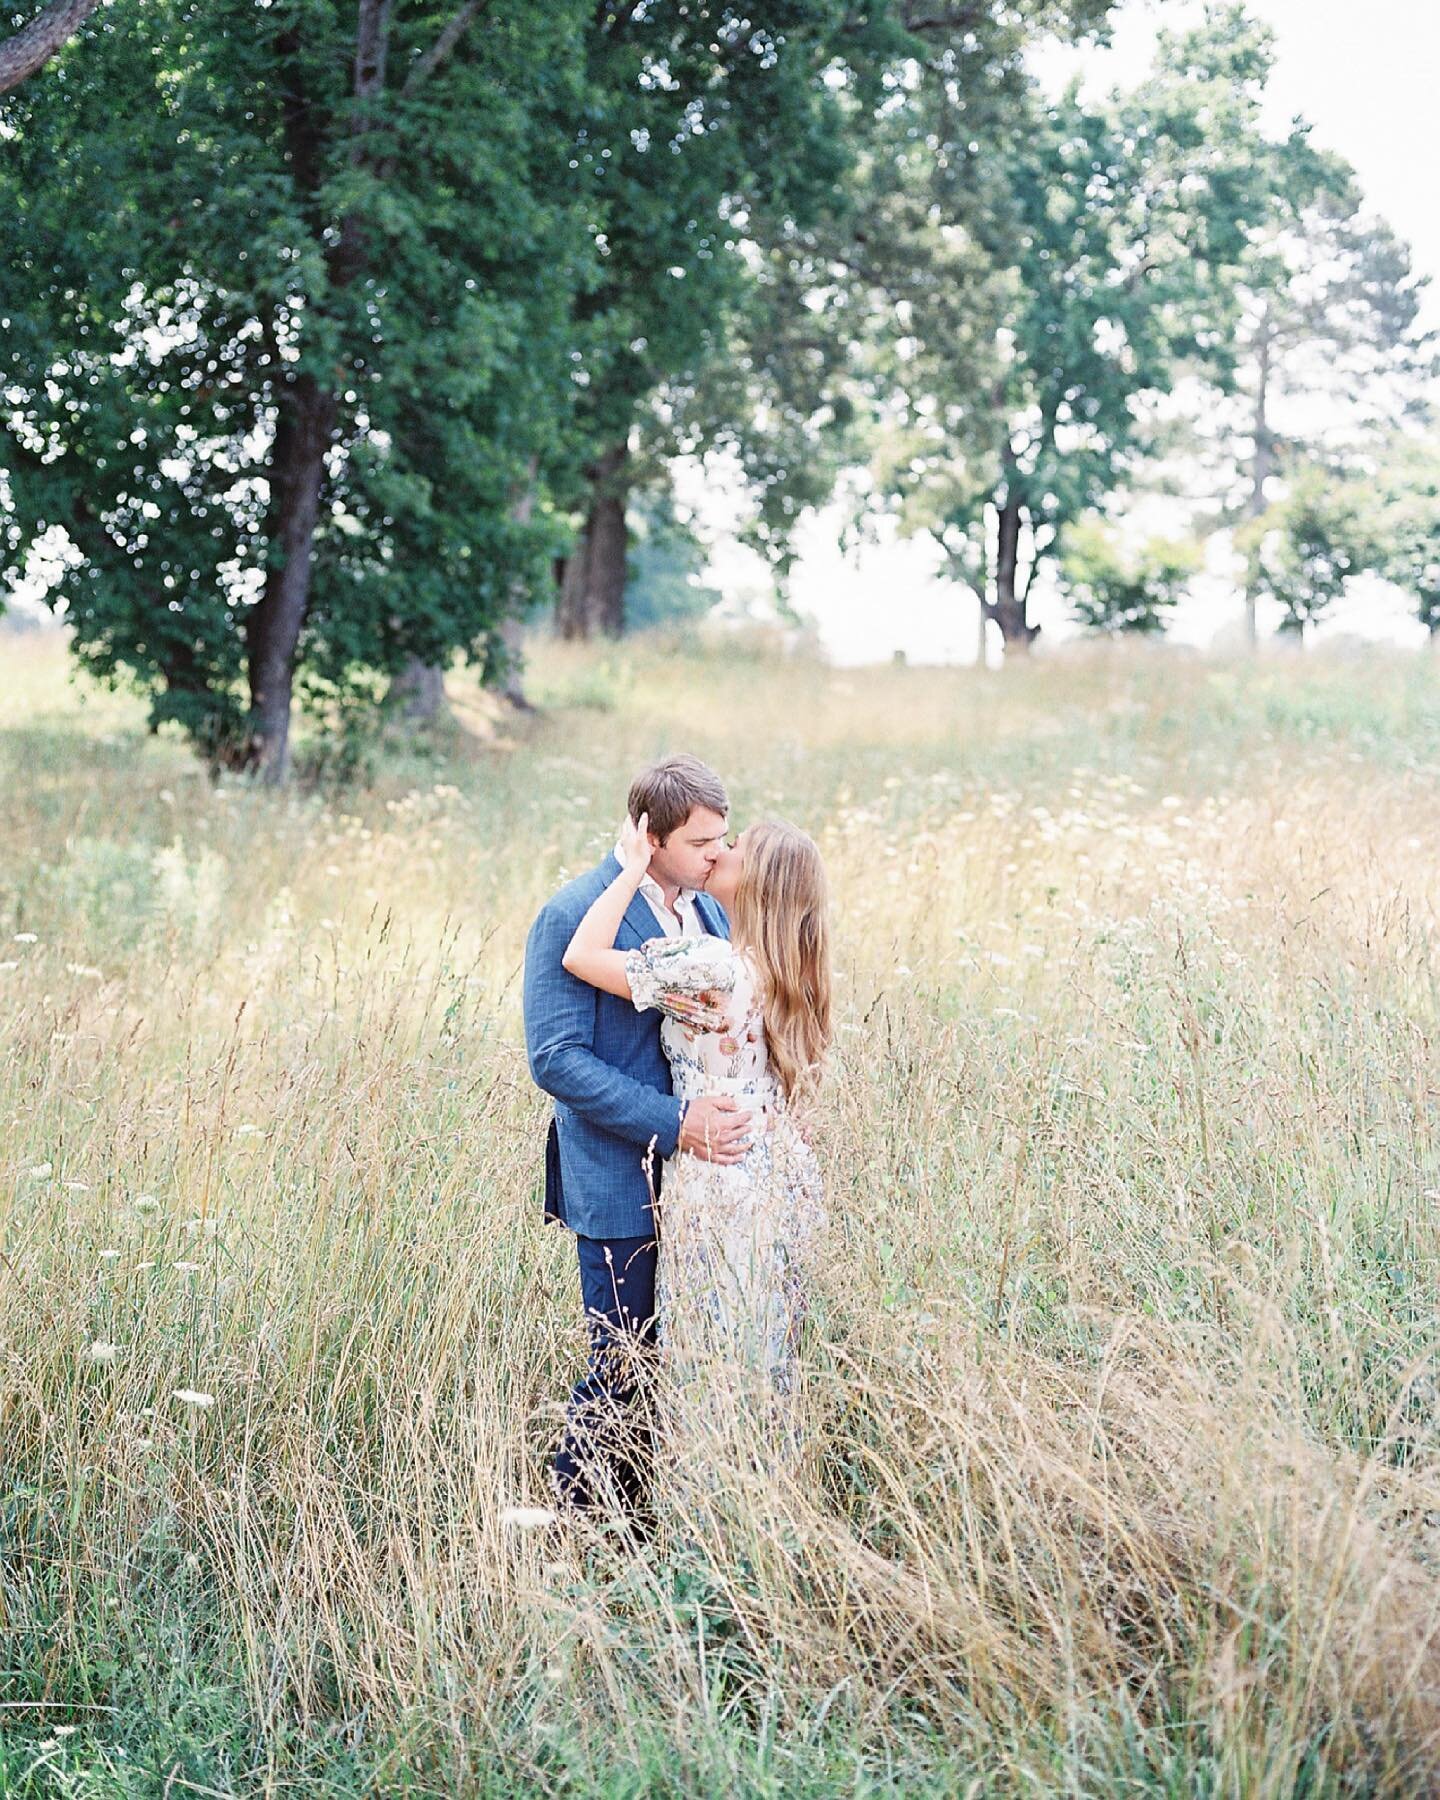 Anna Claire + Brad on the most beautiful June morning! We had so much fun exploring around their home and talking like we had been friends for years. These two have a special kind of love 🤍